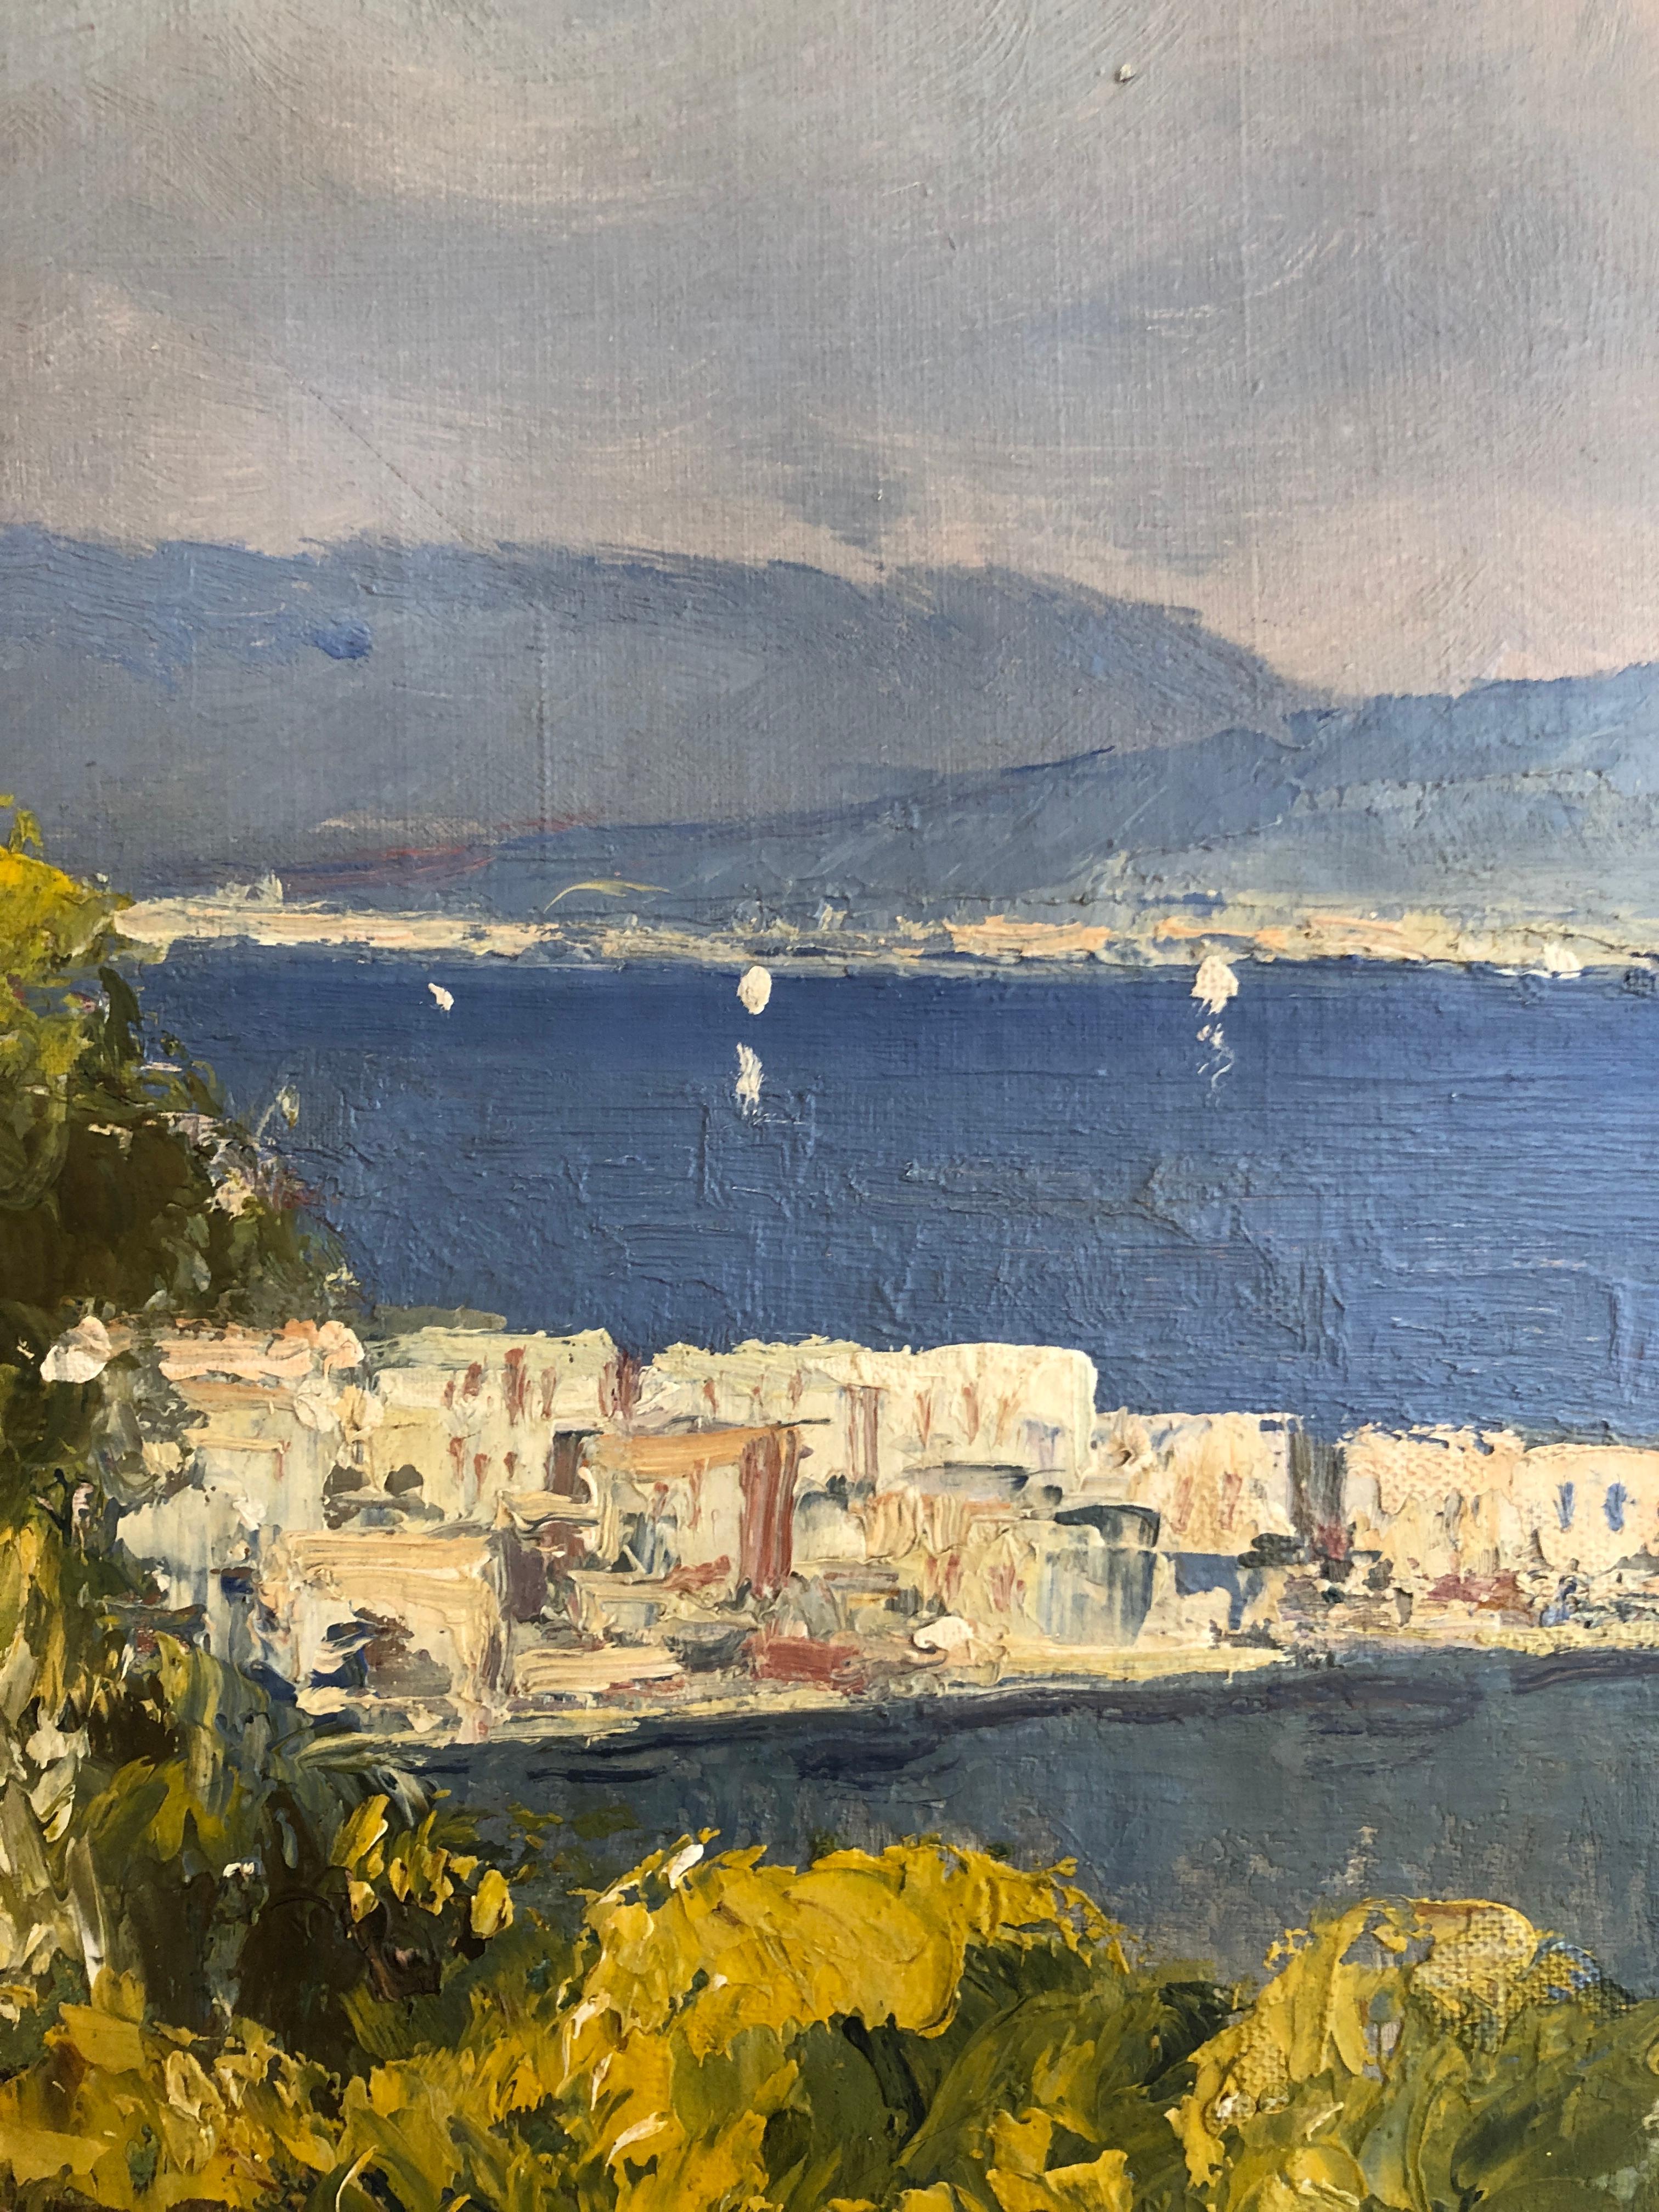 Bay of Naples and view of Vesuvius - Gray Landscape Painting by U.Maresca